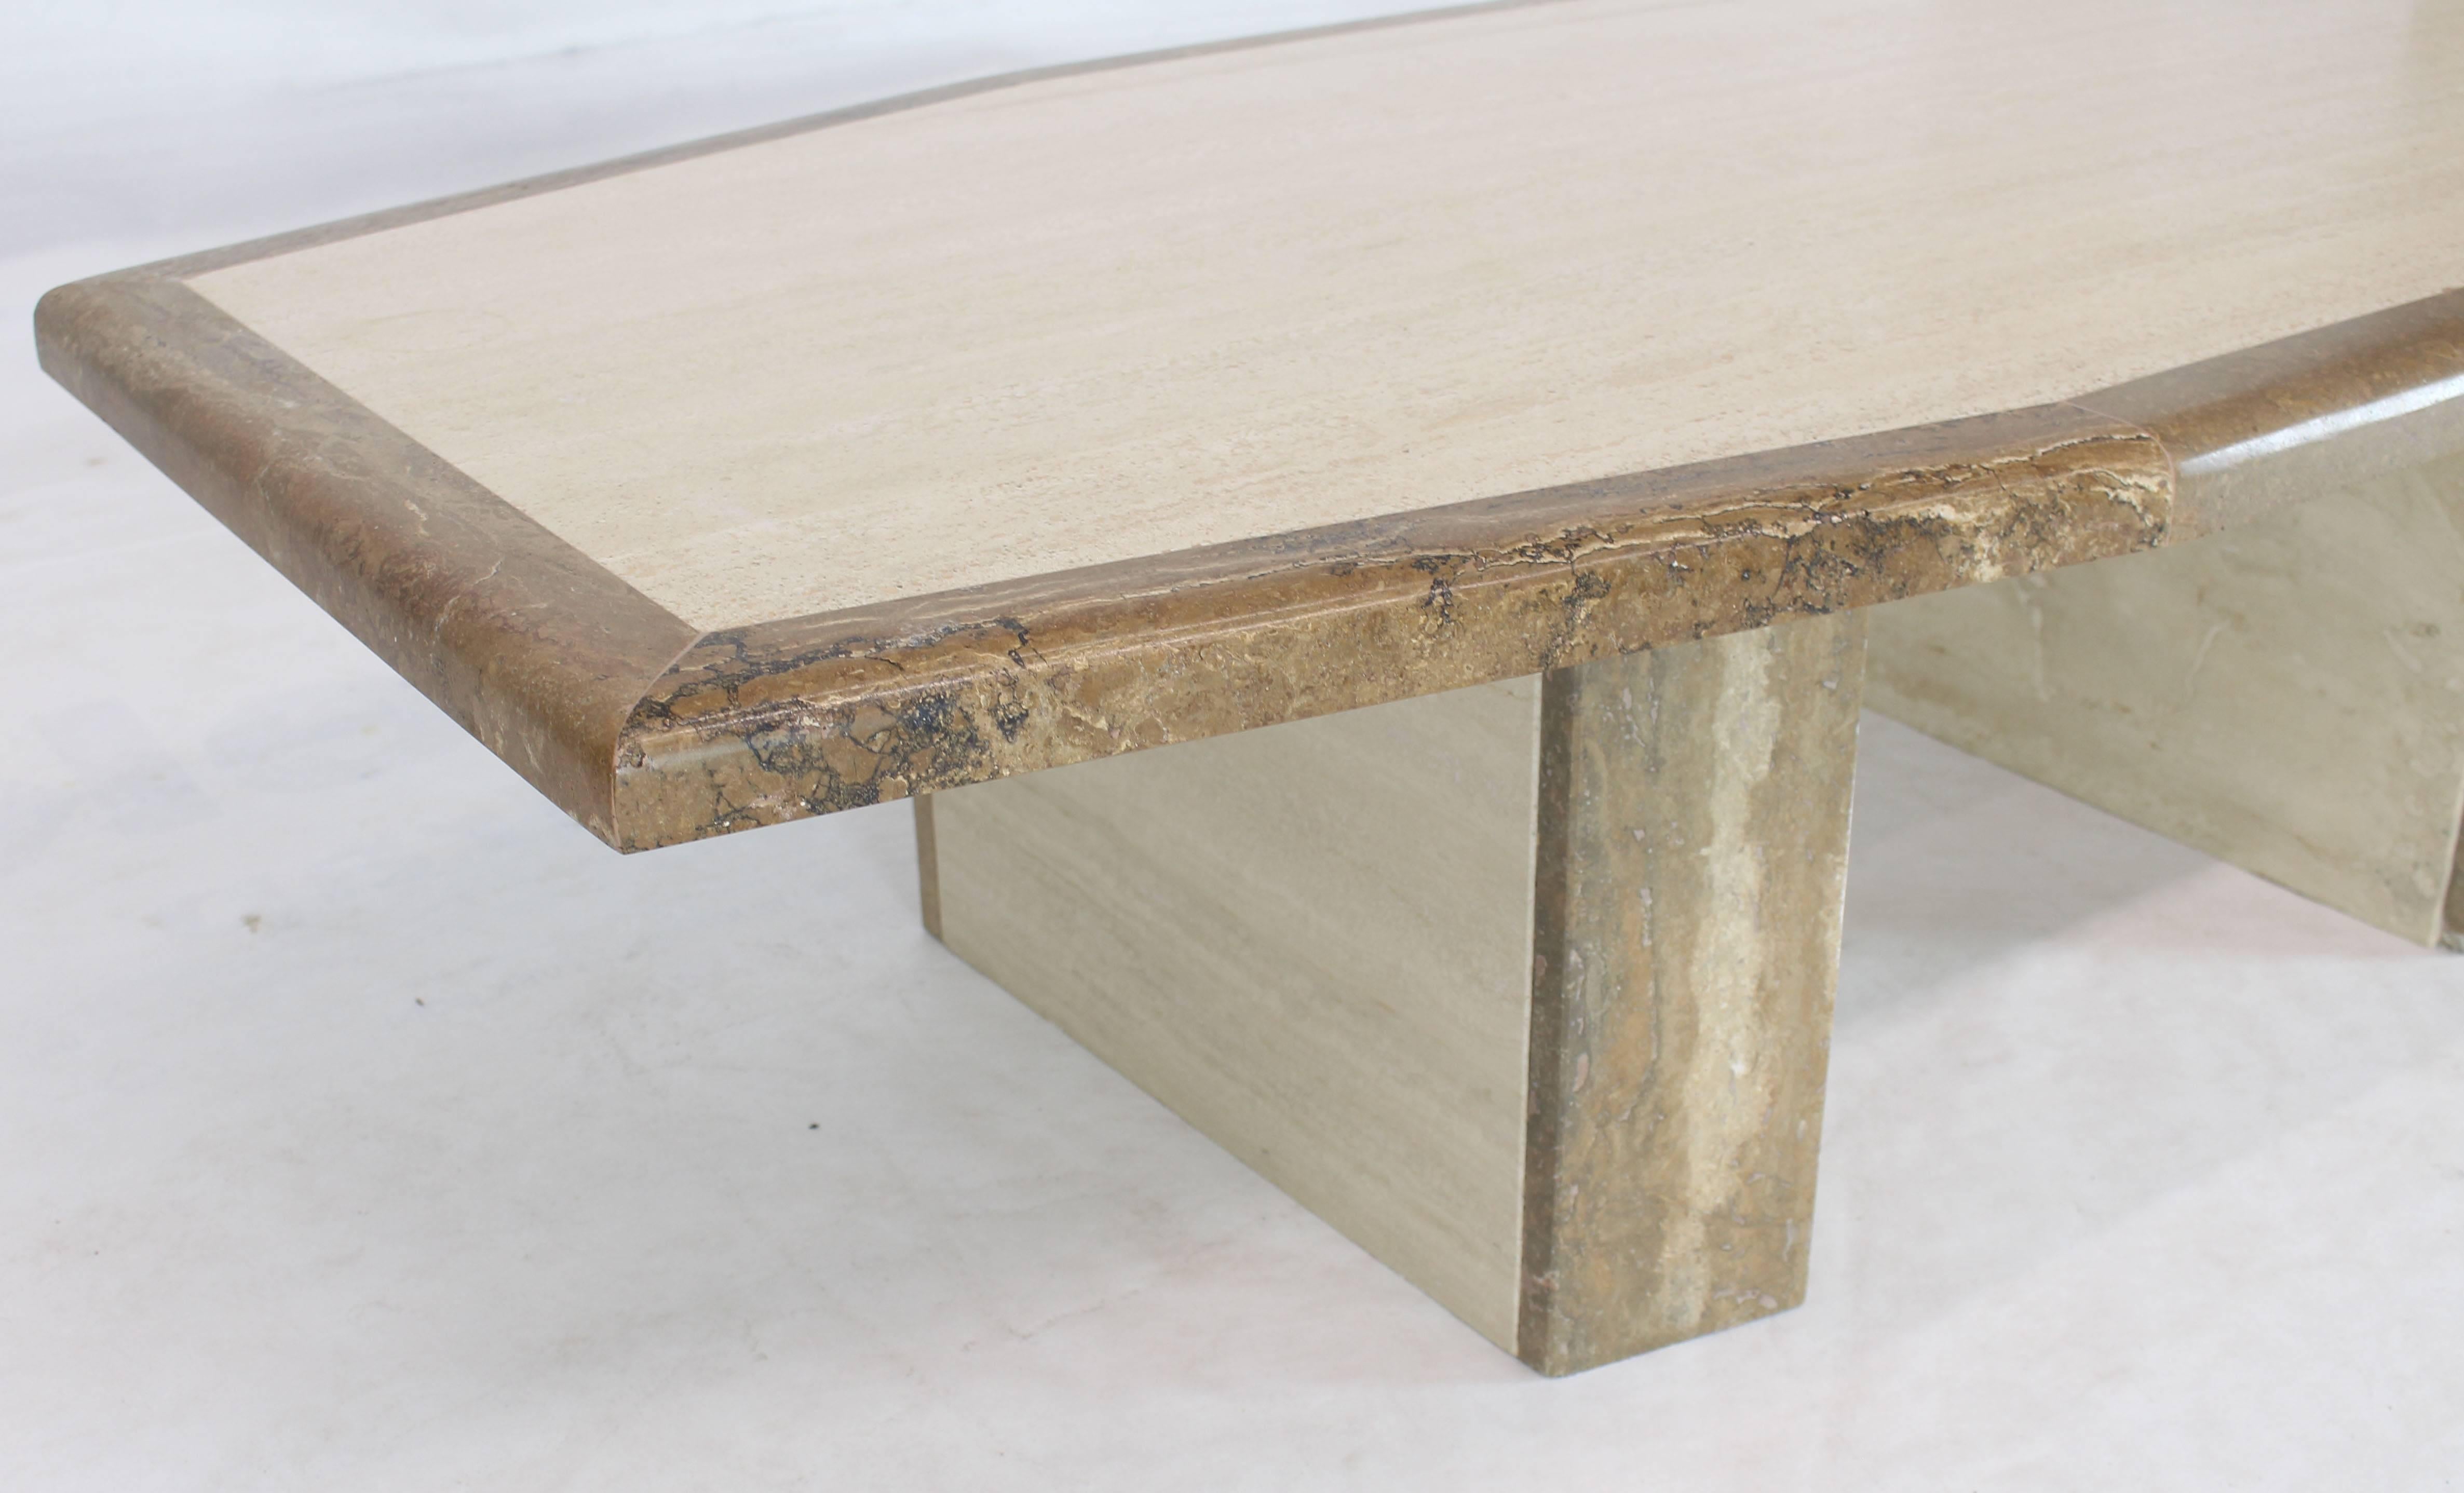 Polished Travertine and Marble Tow-Tone Boat Shape Coffee Table